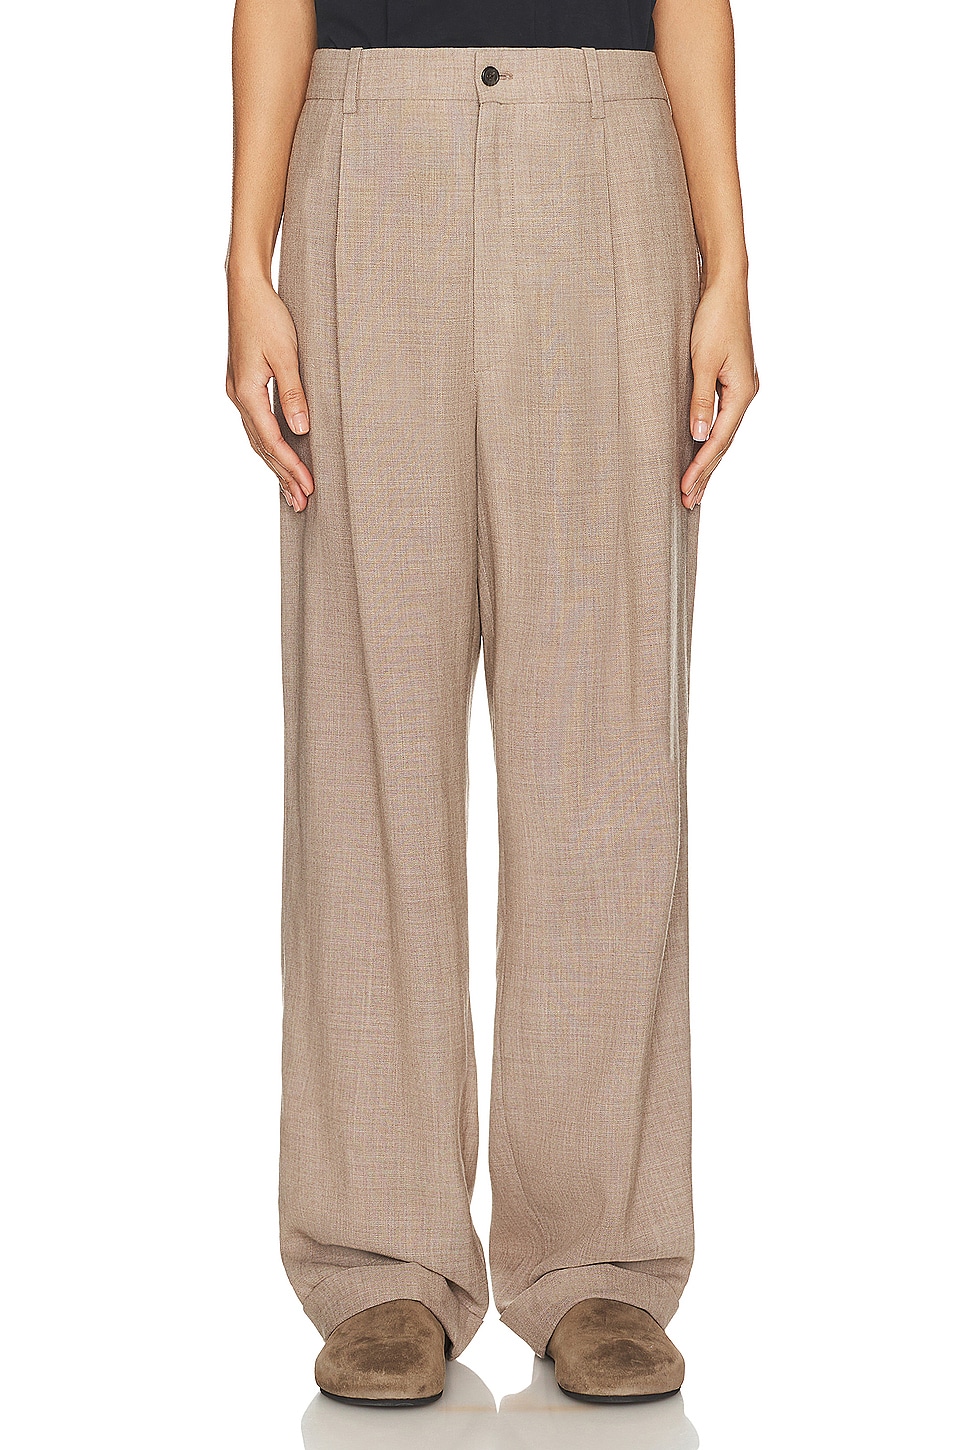 Image 1 of The Row Tor Pant in Taupe & Ivory Melange